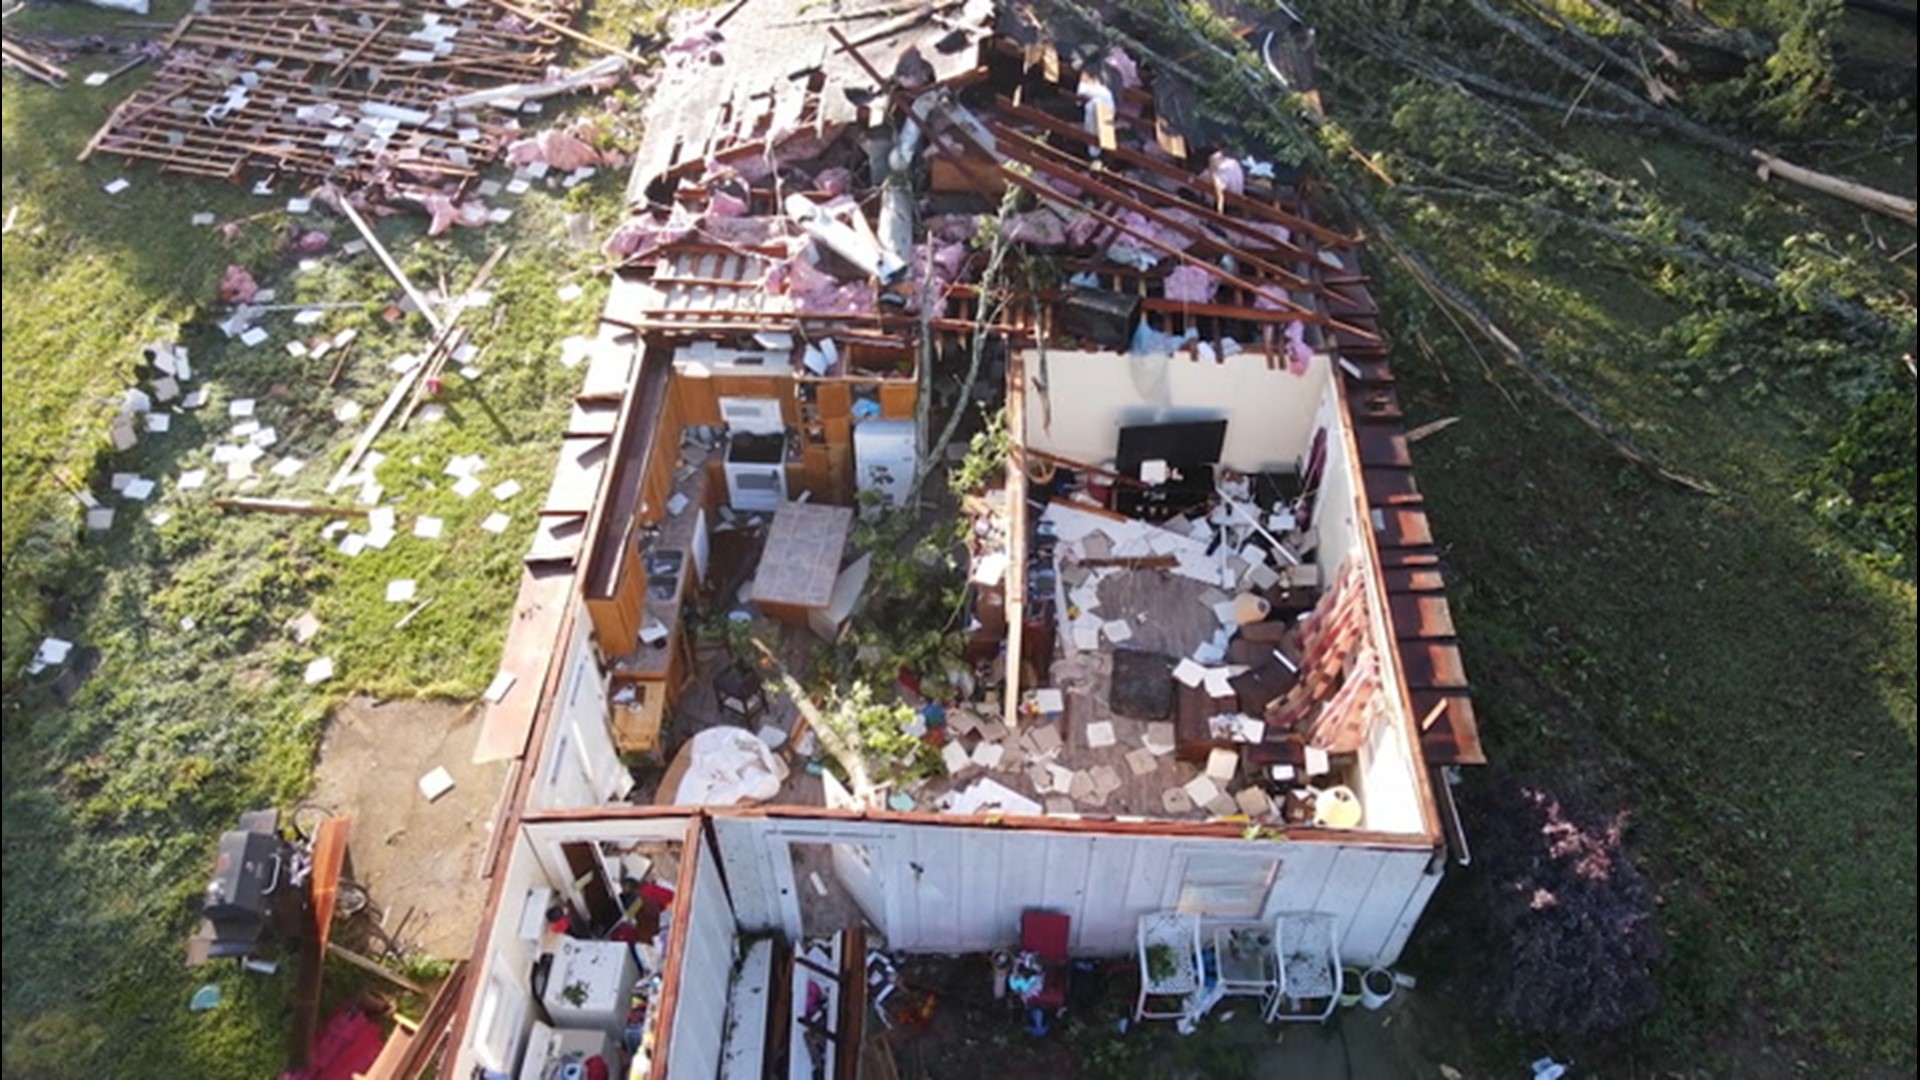 This drone video, recorded by Bill Wadell, captures the devastation left behind in the aftermath of a tornado that swept through Bastrop, Louisiana, on April 8.